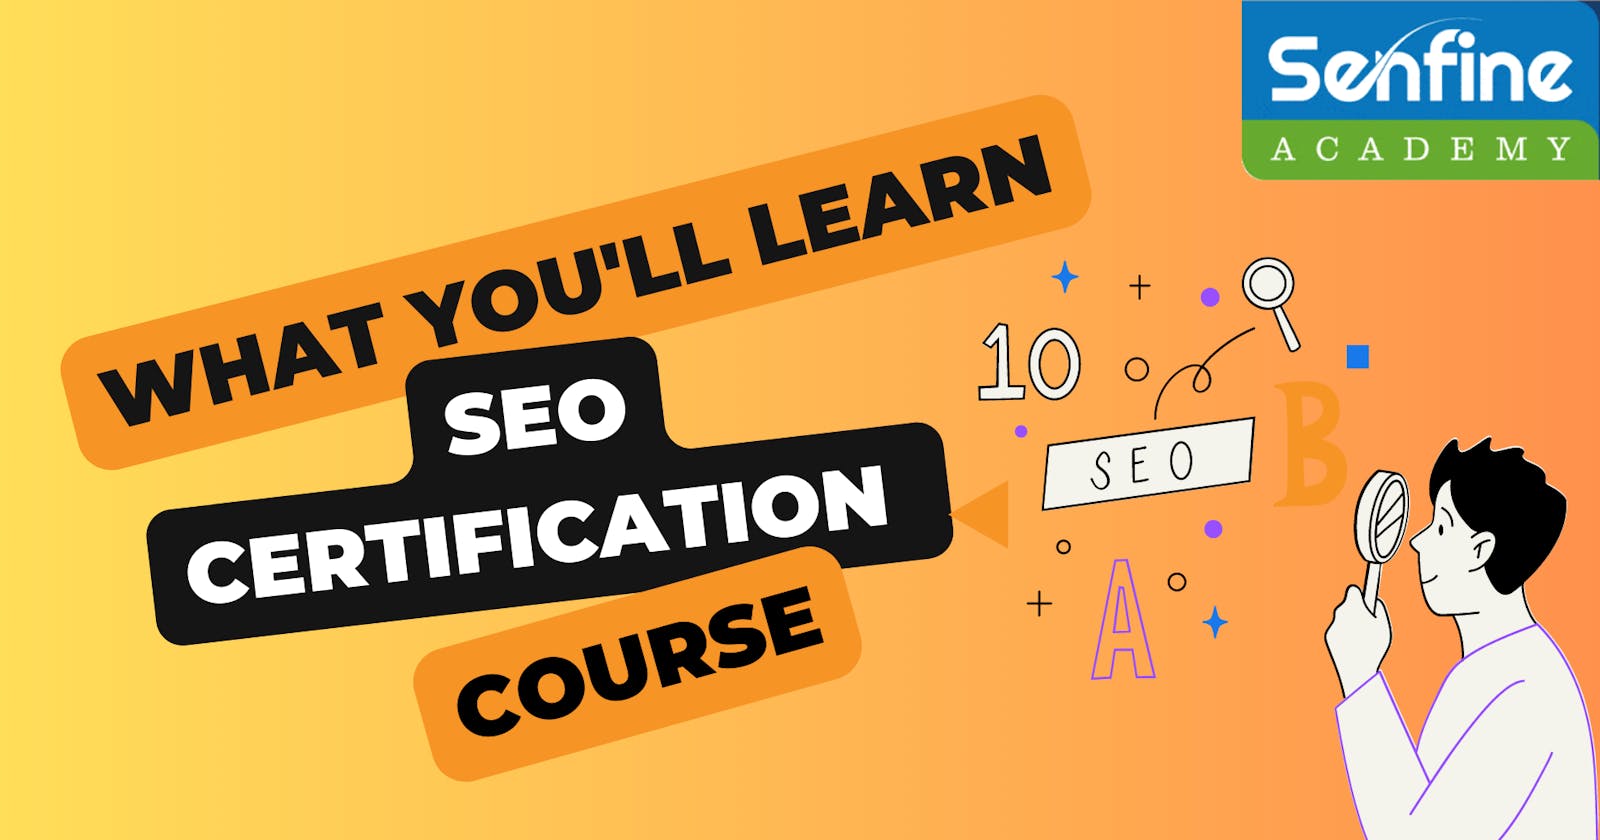 Inside Look: What You'll Learn in an SEO Certification Course